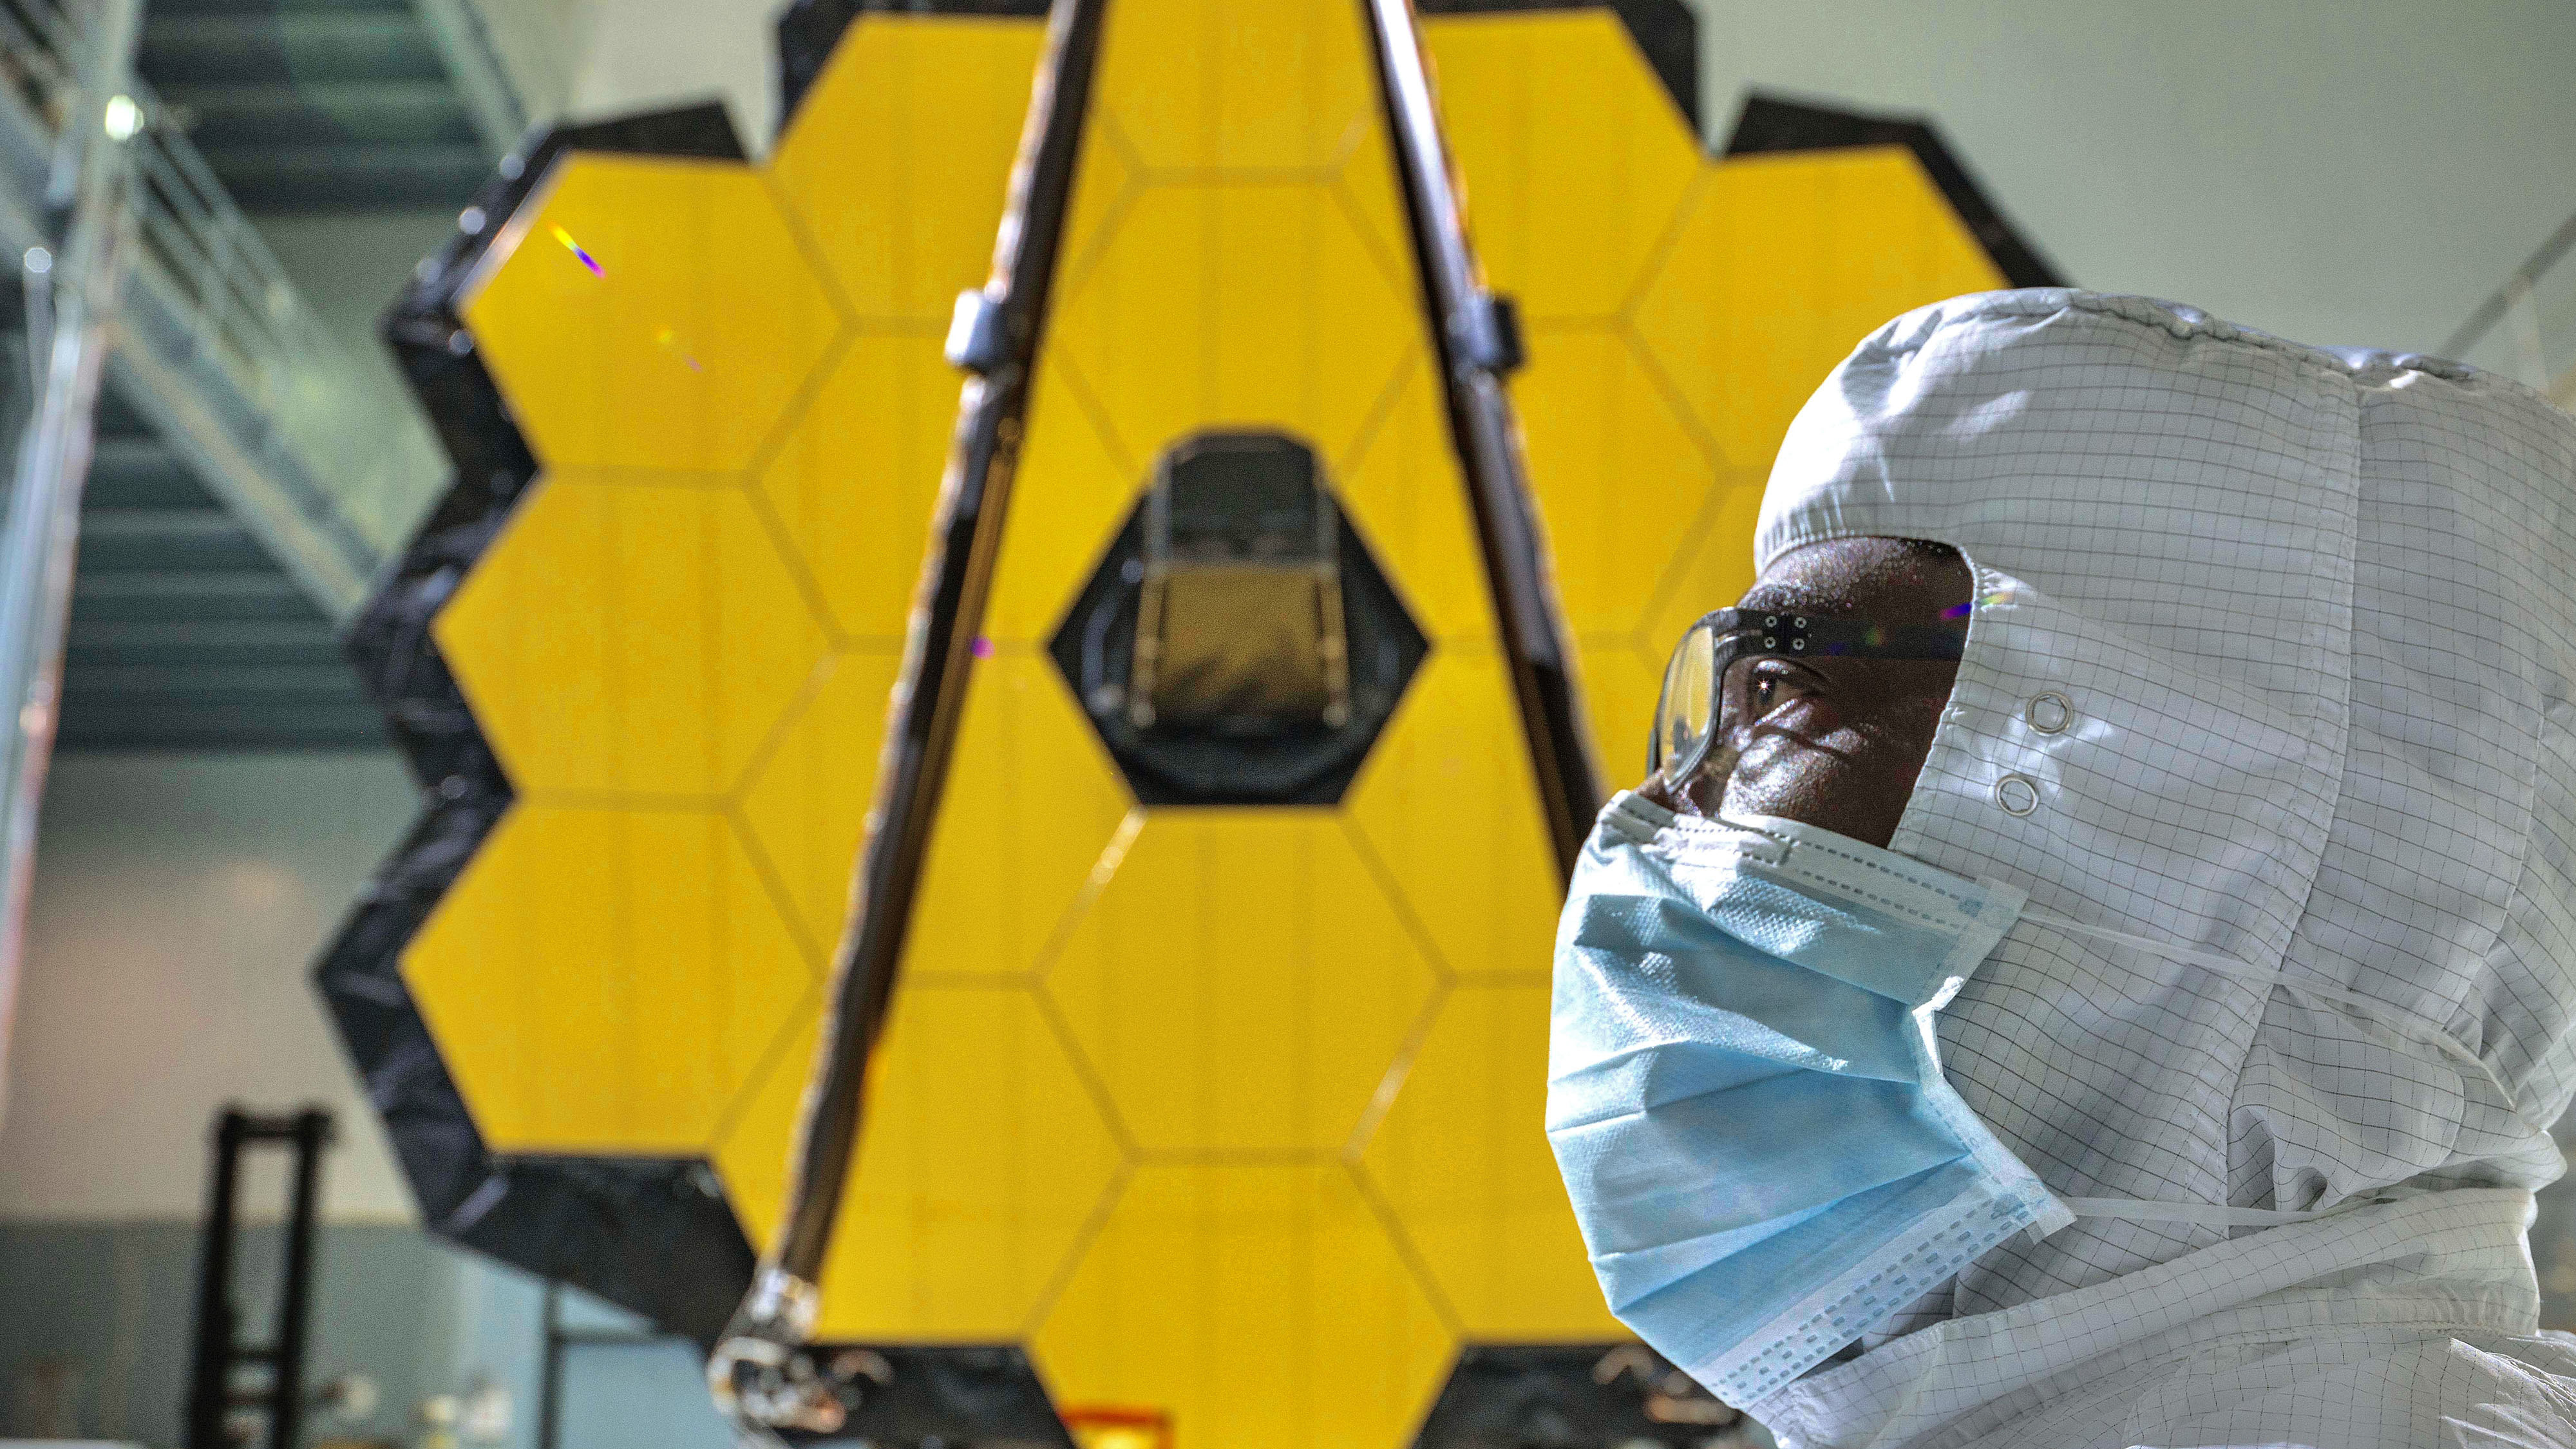 In the foreground, the side profile of Webb lead photographer Chris Gunn wearing glasses and a mask in a cleanroom suit stares intently off screen to the left. Directly behind, the slightly blurry, full honeycomb like golden mirror of the James Webb Space Telescope is in clear view taking up most of the frame.